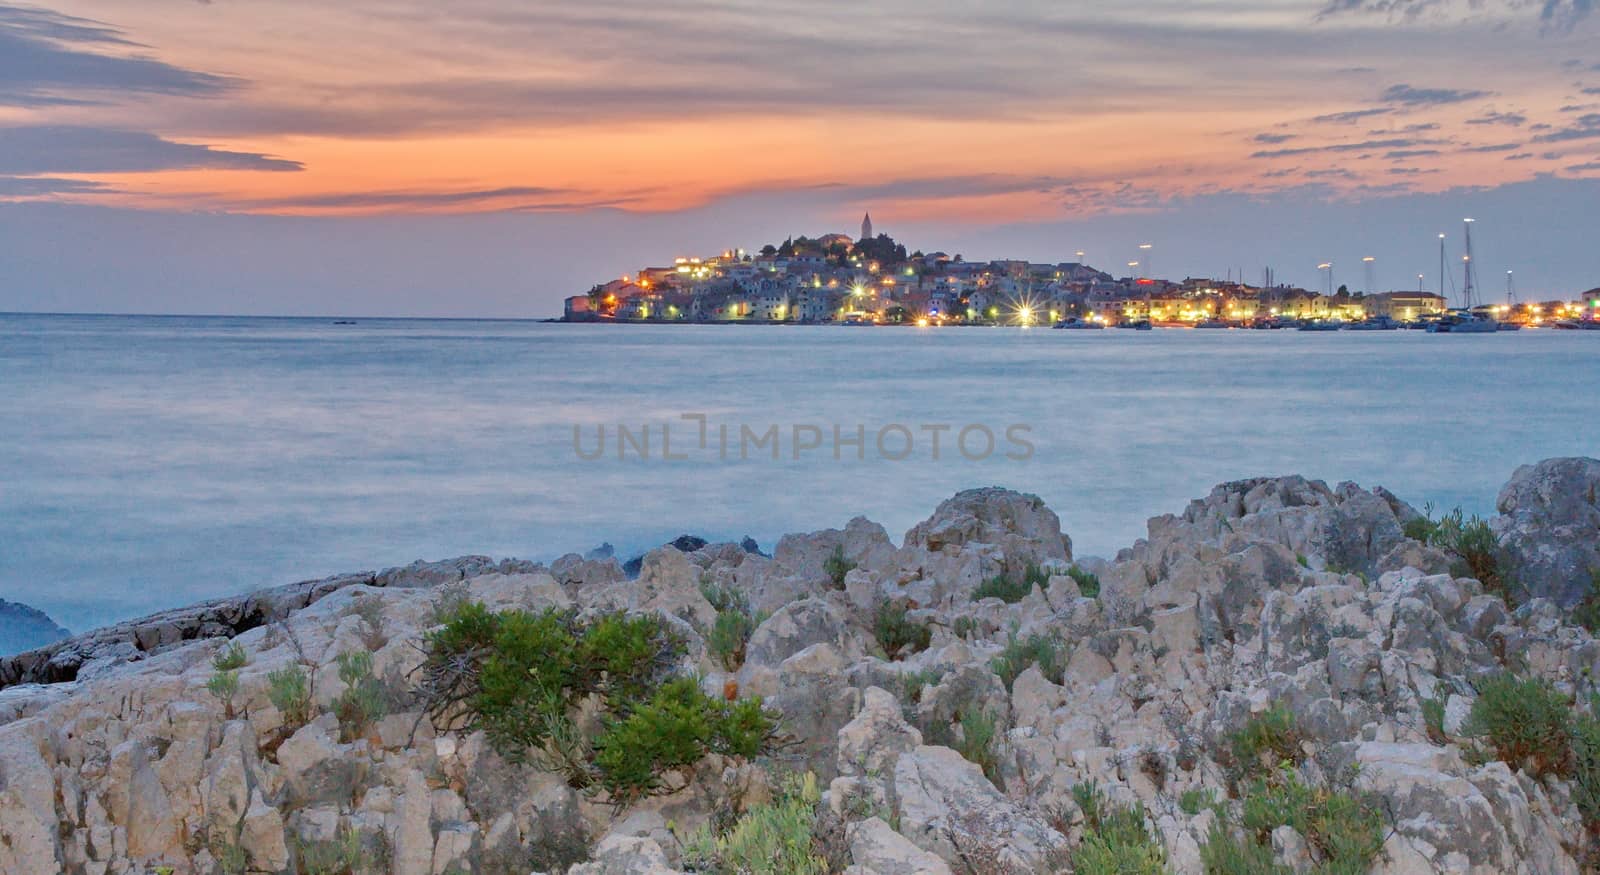 City of Primosten in Croatia at sunset by anderm